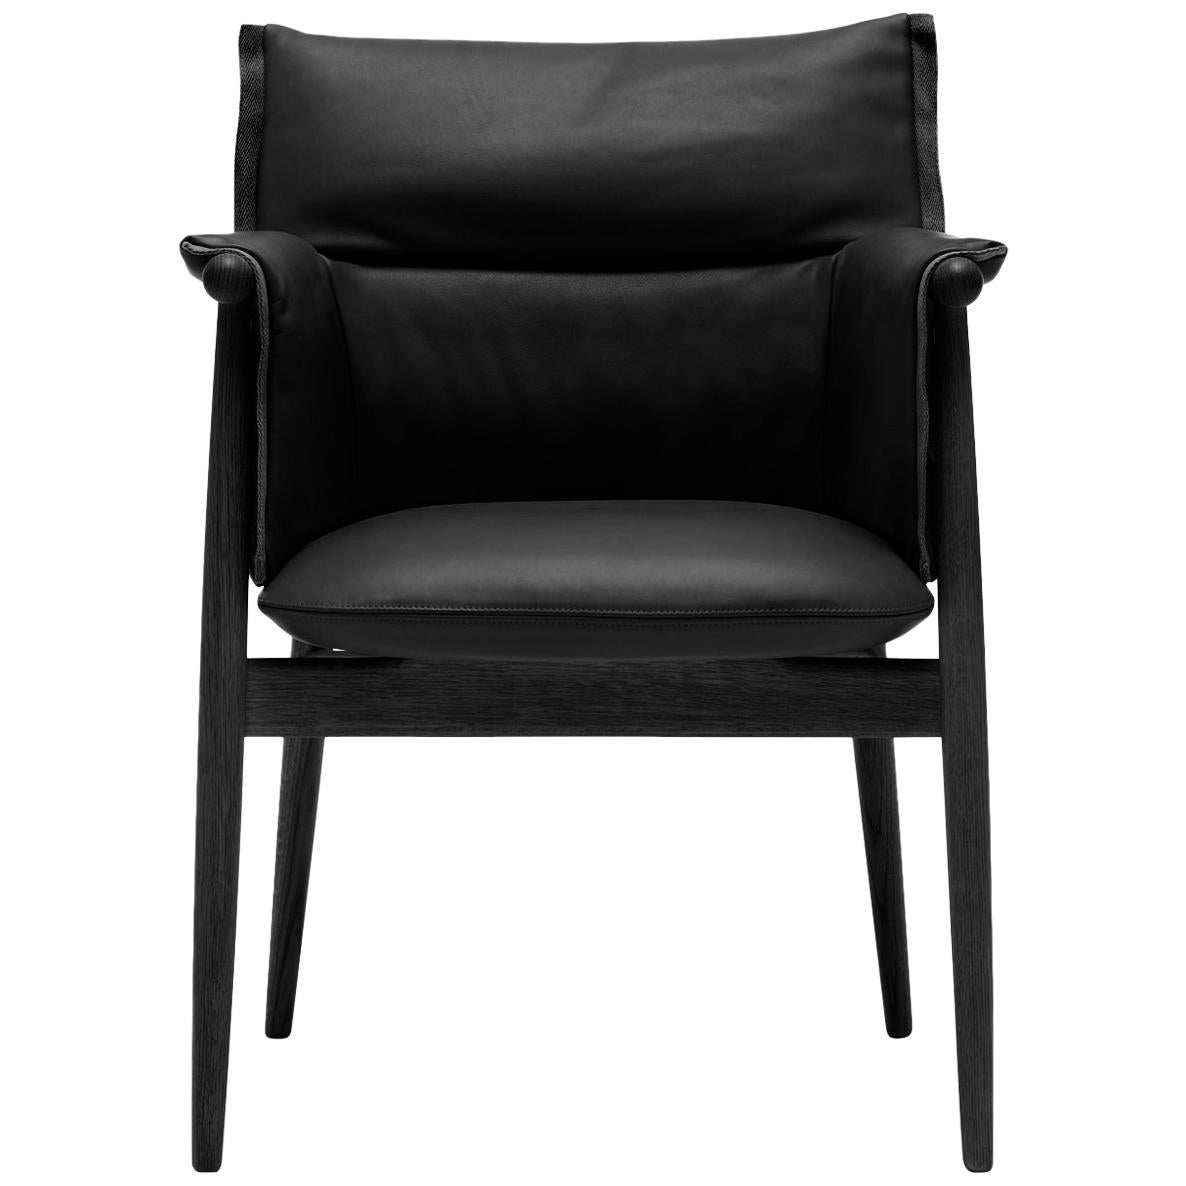 Black (Thor 301) E005 Embrace Dining Chair in Oak Painted Black with Black Edging Strip by EOOS